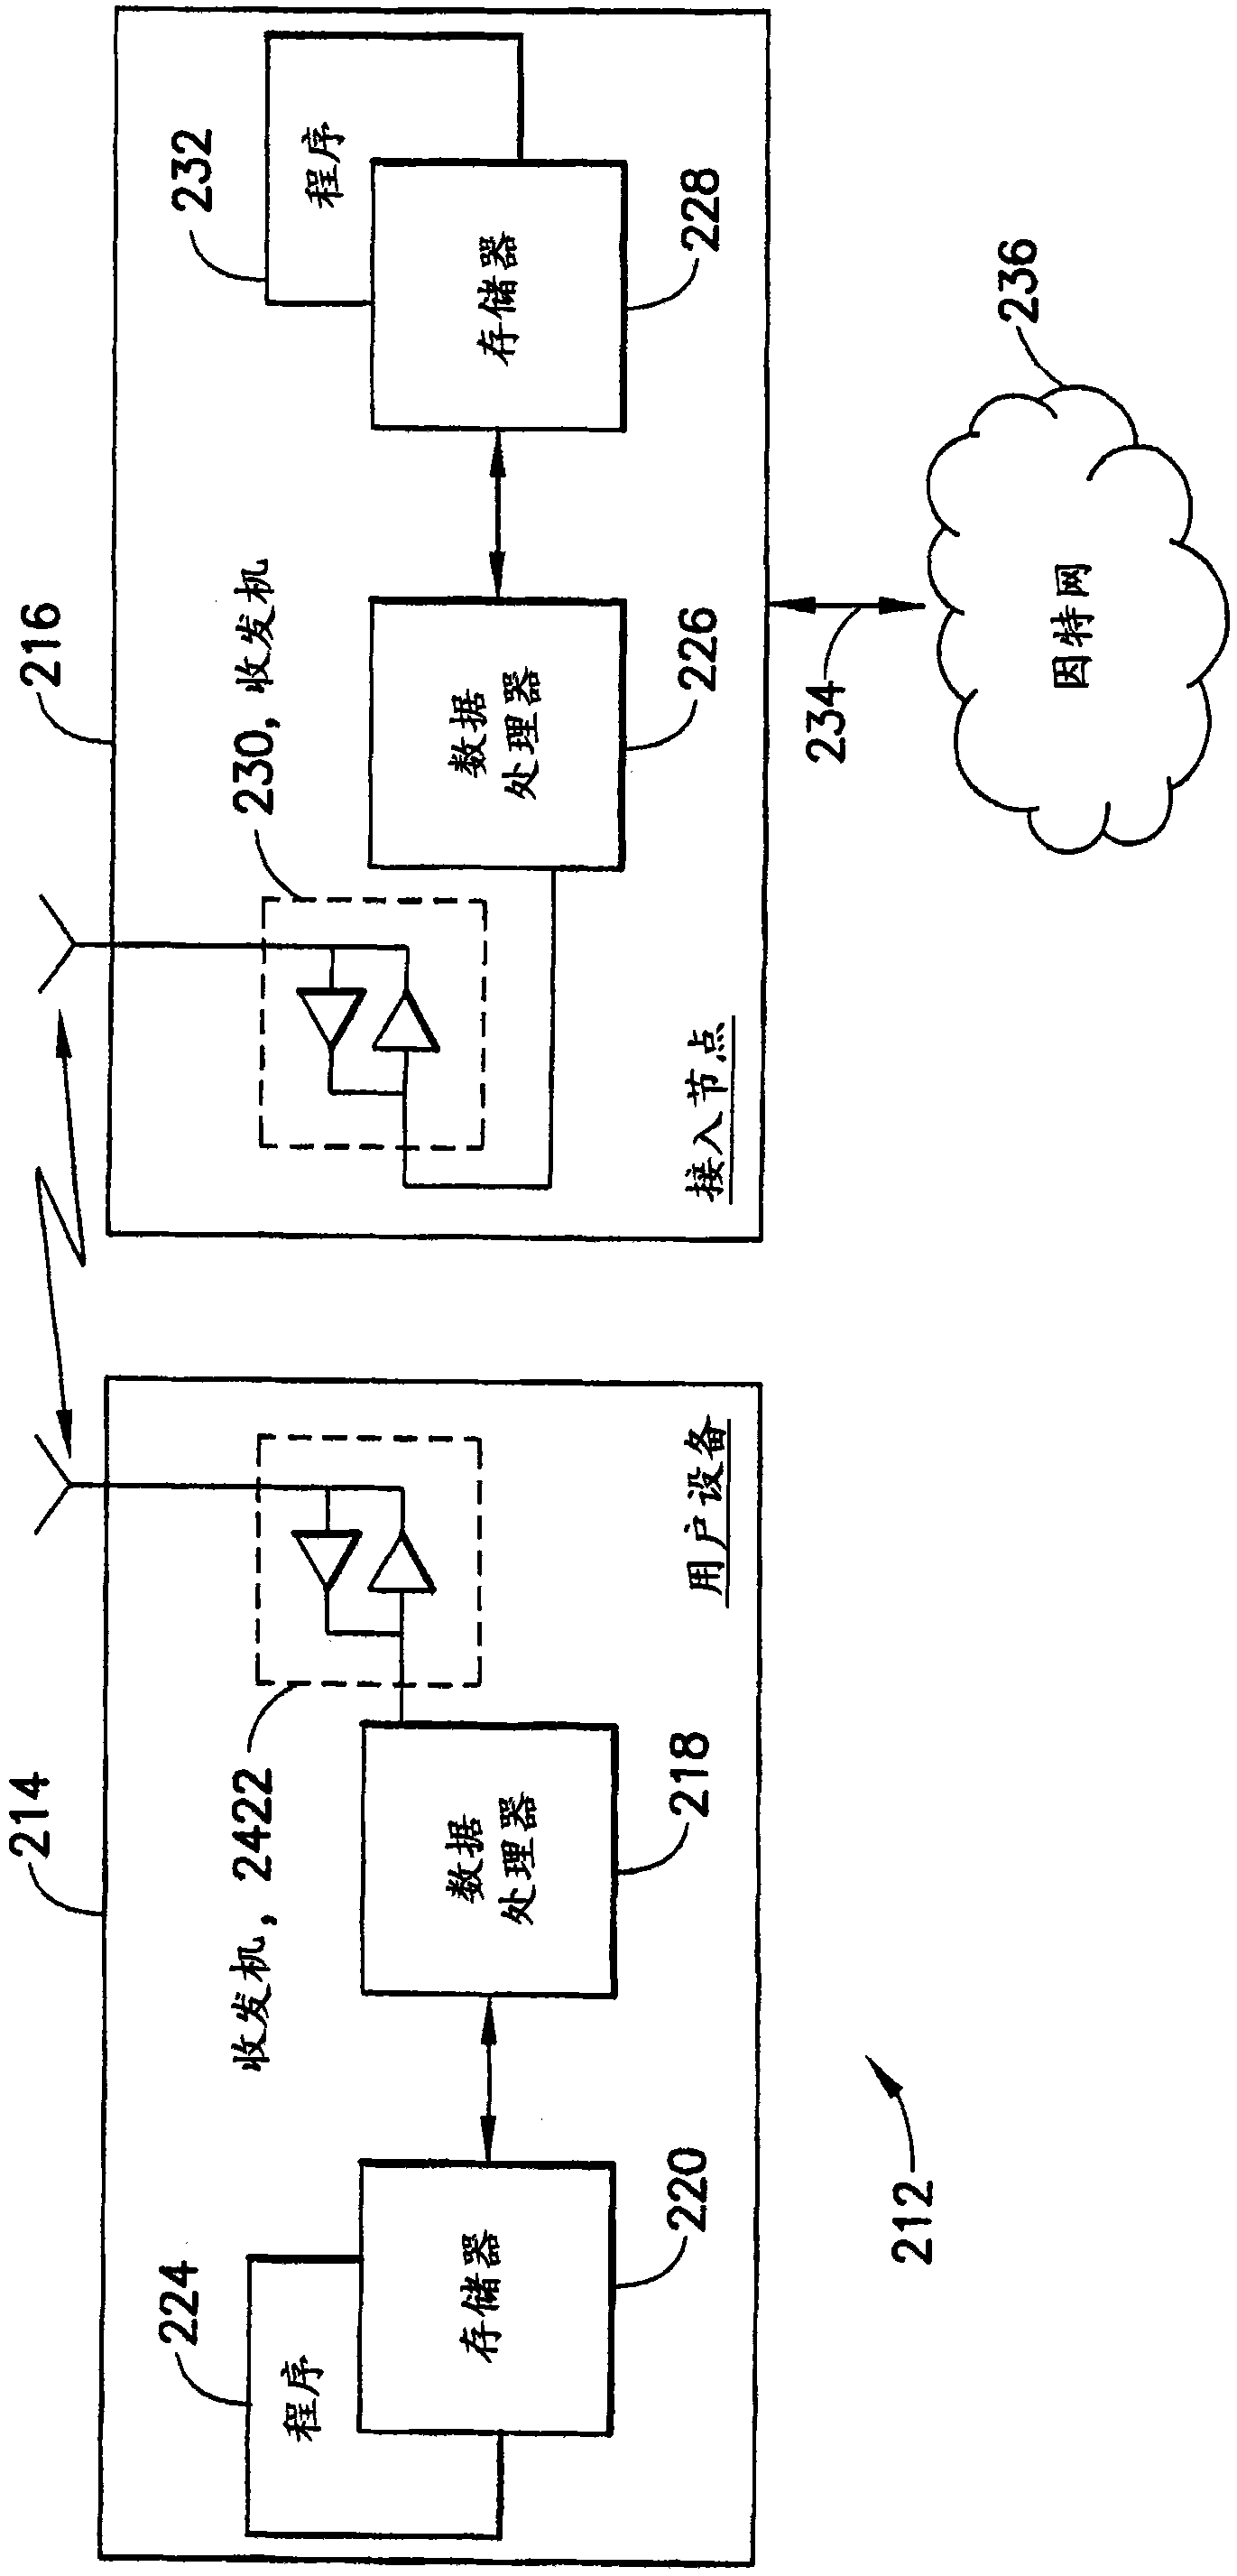 Method, apparatus, computer program product and device providing semi-parallel low density parity check decoding using a block structured parity check matrix